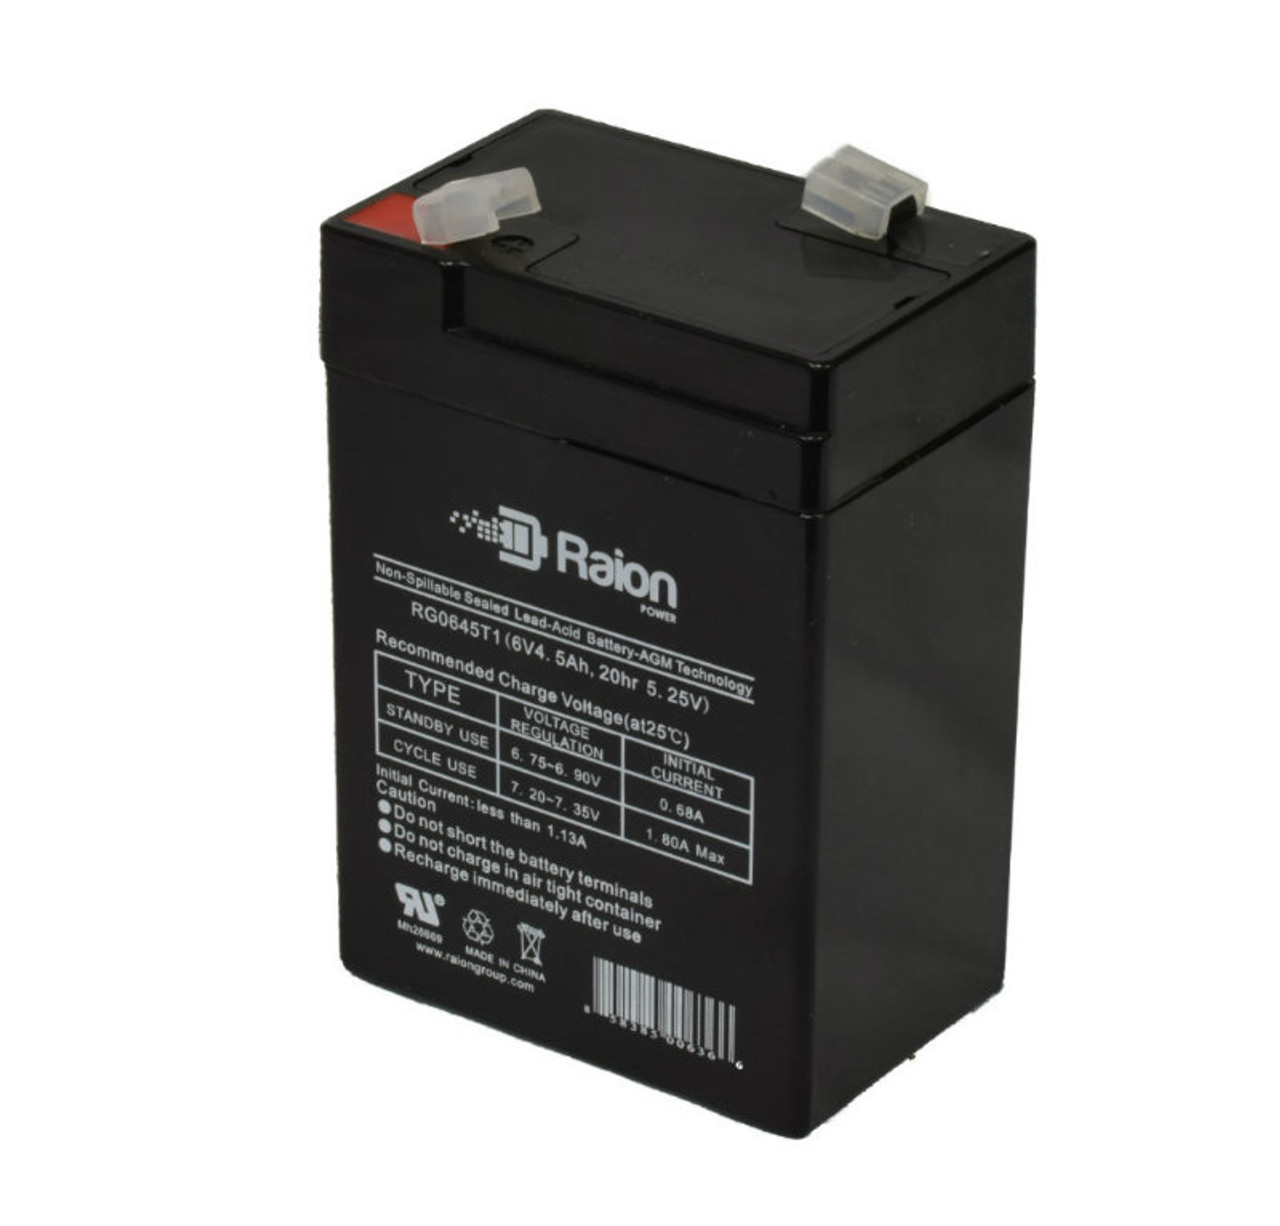 Raion Power RG0645T1 6V 4.5Ah Replacement Battery Cartridge for Kung Long WP4.5-6W